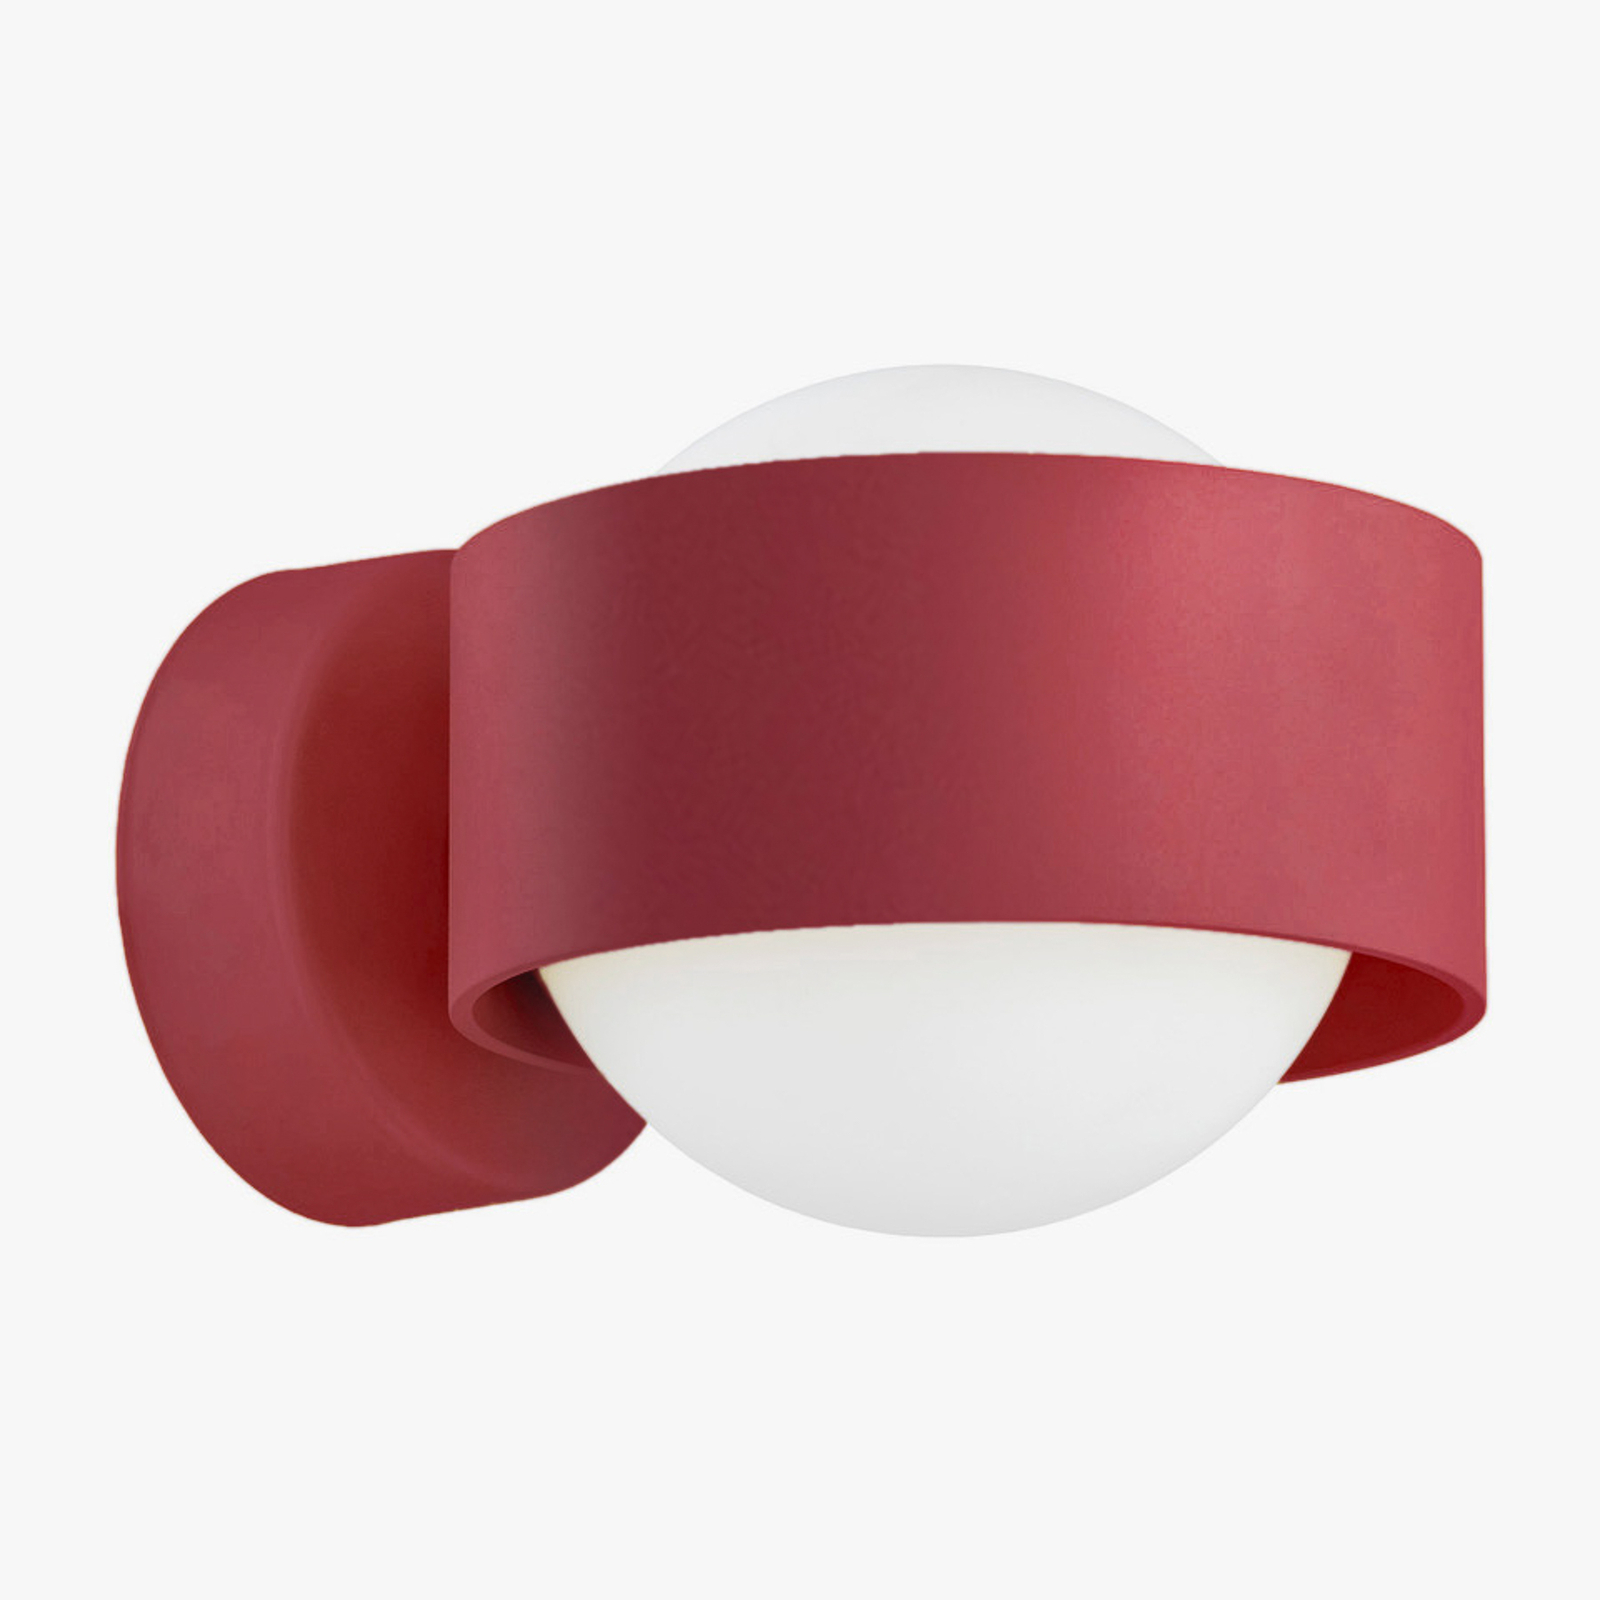 Mado wall light made of glass and steel, red